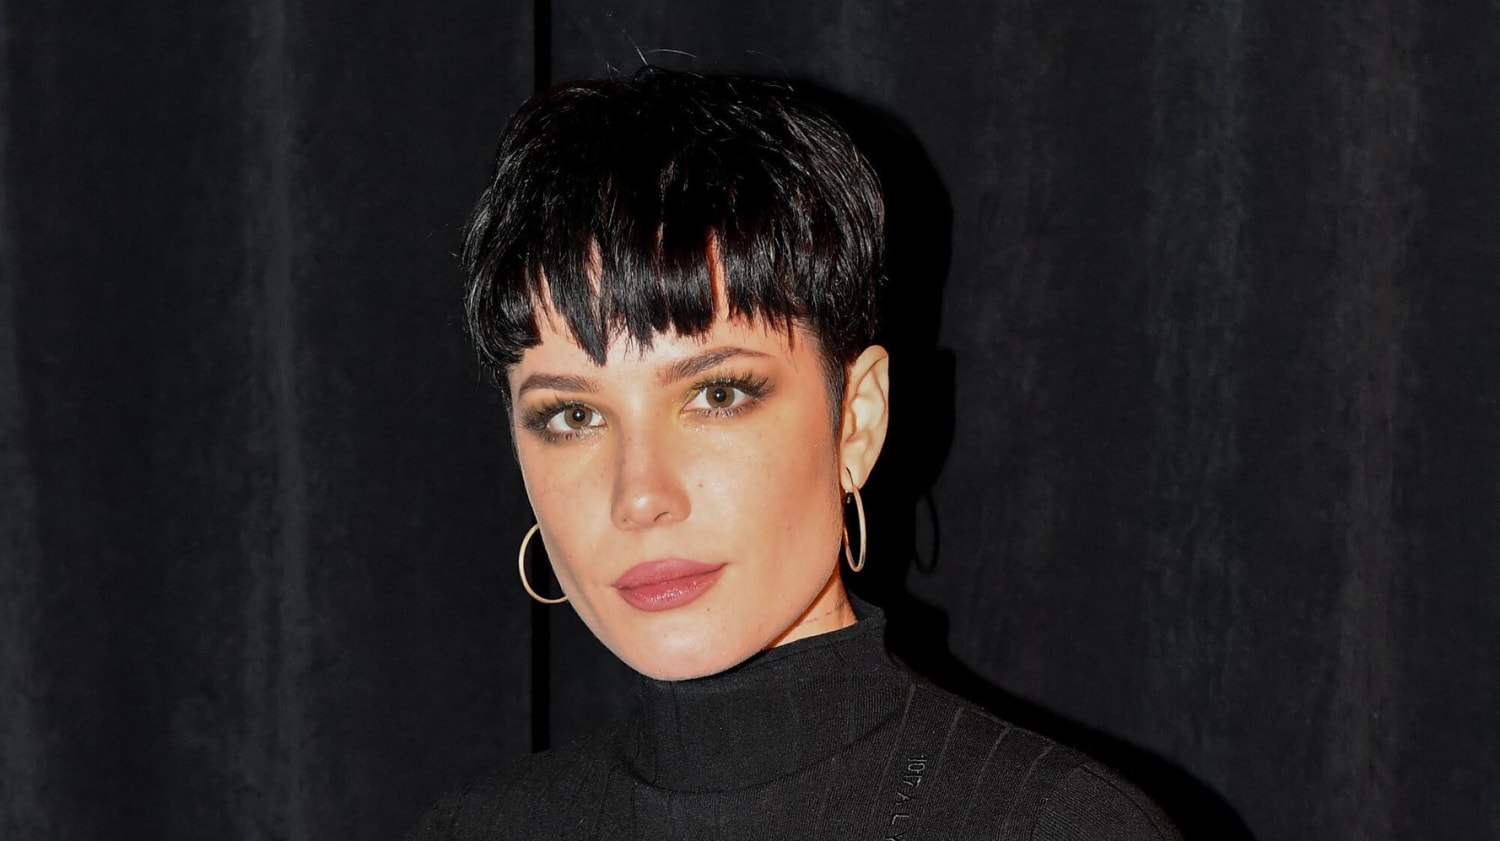 Halsey Fractured Her Ankle On Her Dishwasher While In Lockdown